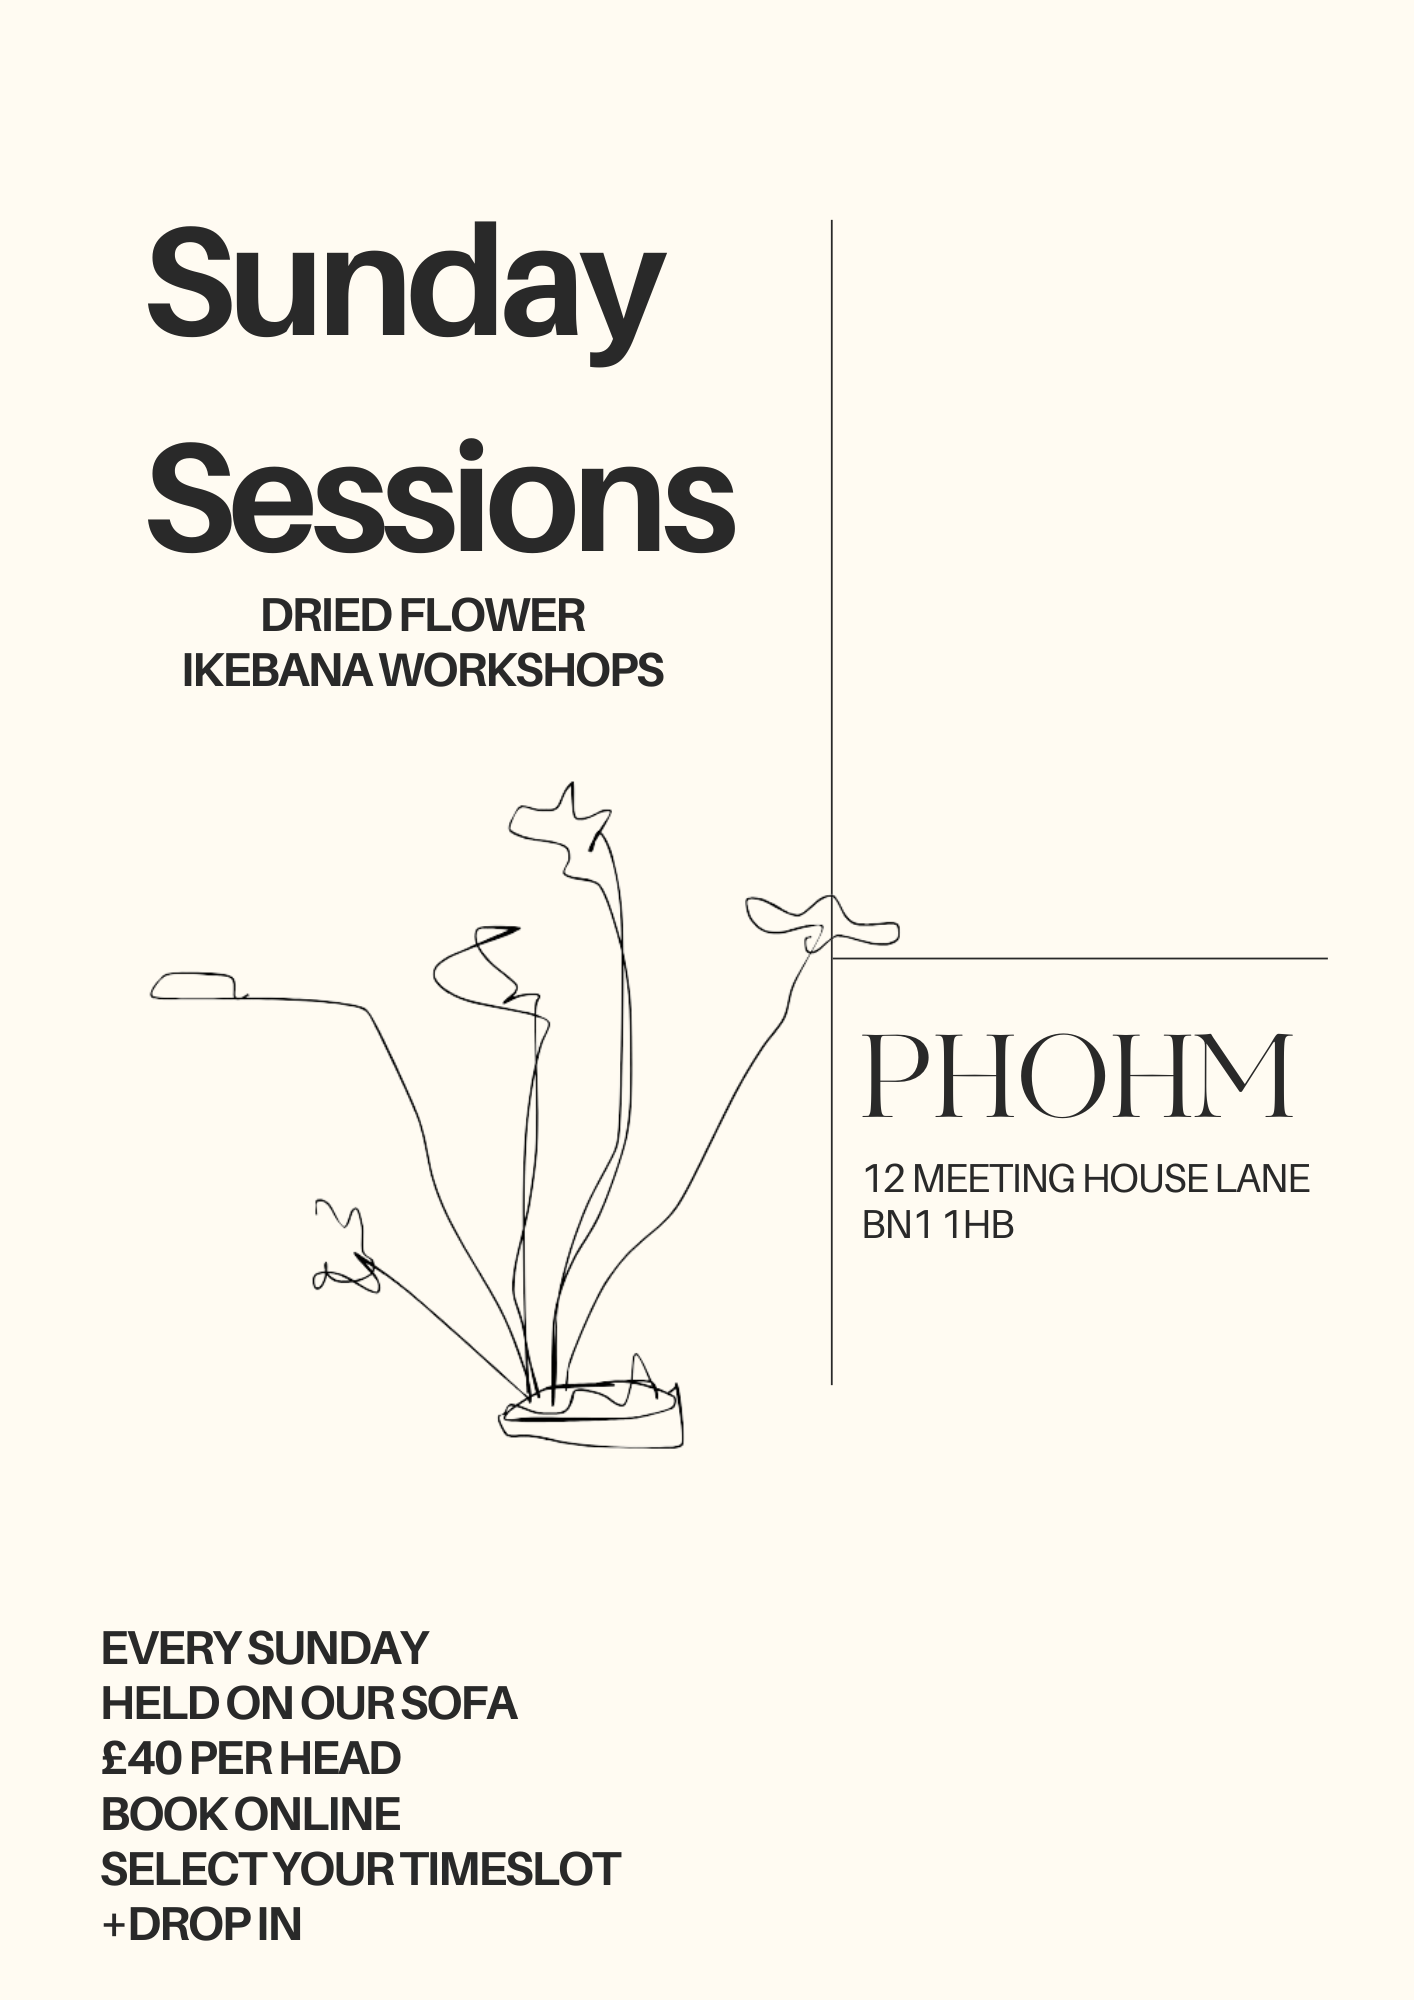 Sunday Sessions Drop-in Dried Flower Ikebana Workshop